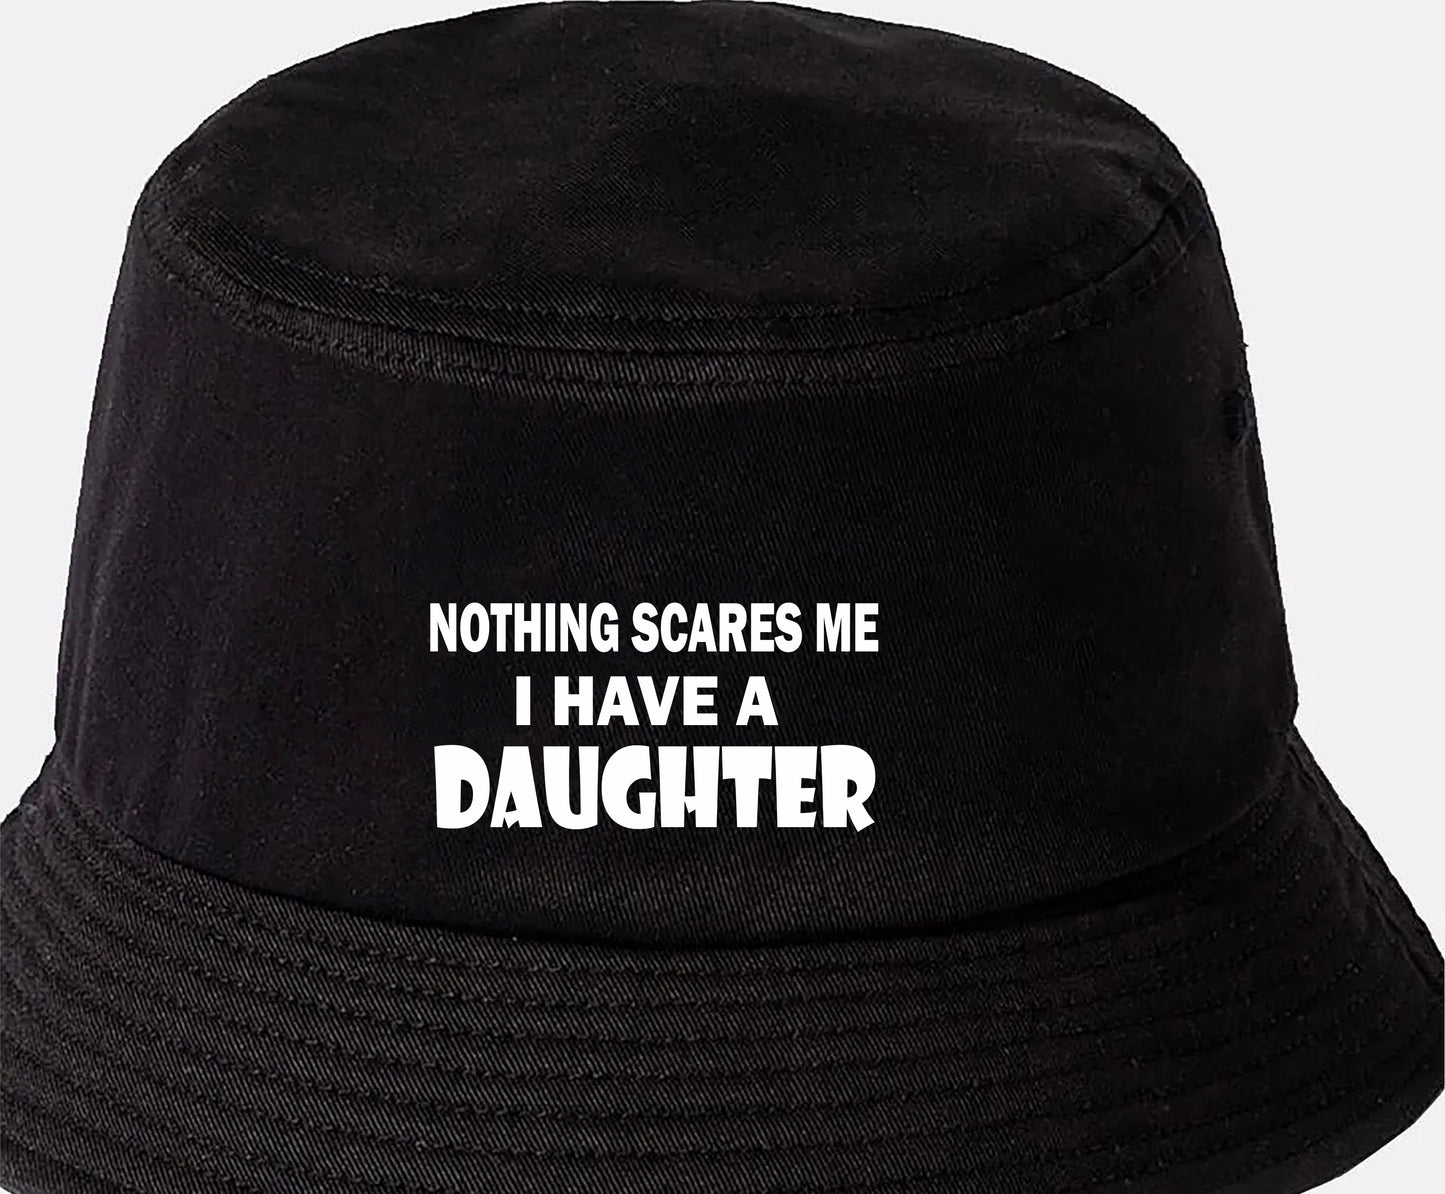 Can't Scare Me I Have a Daughter Bucket Hat Funny Birthday Gift for Men